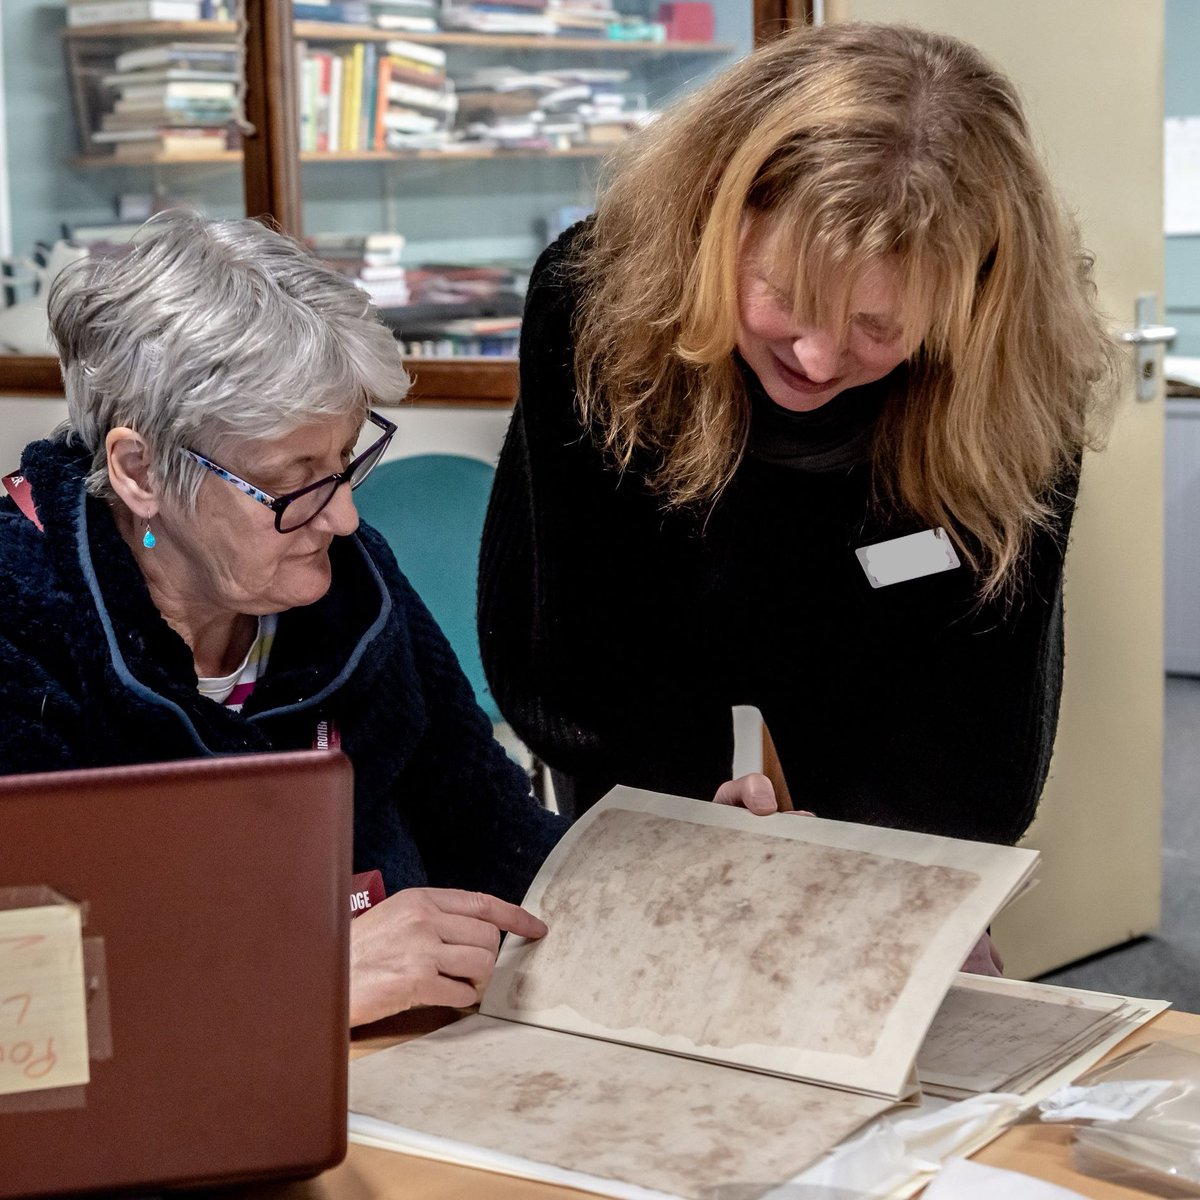 We're working with @ARAUK_IE to improve the leadership and management skills of archivists, records managers and conservators - but we need your help first! Sign up for a focus group or answer some quick questions by 3 May to inform our sector support: smartsurvey.co.uk/s/FutureSector…